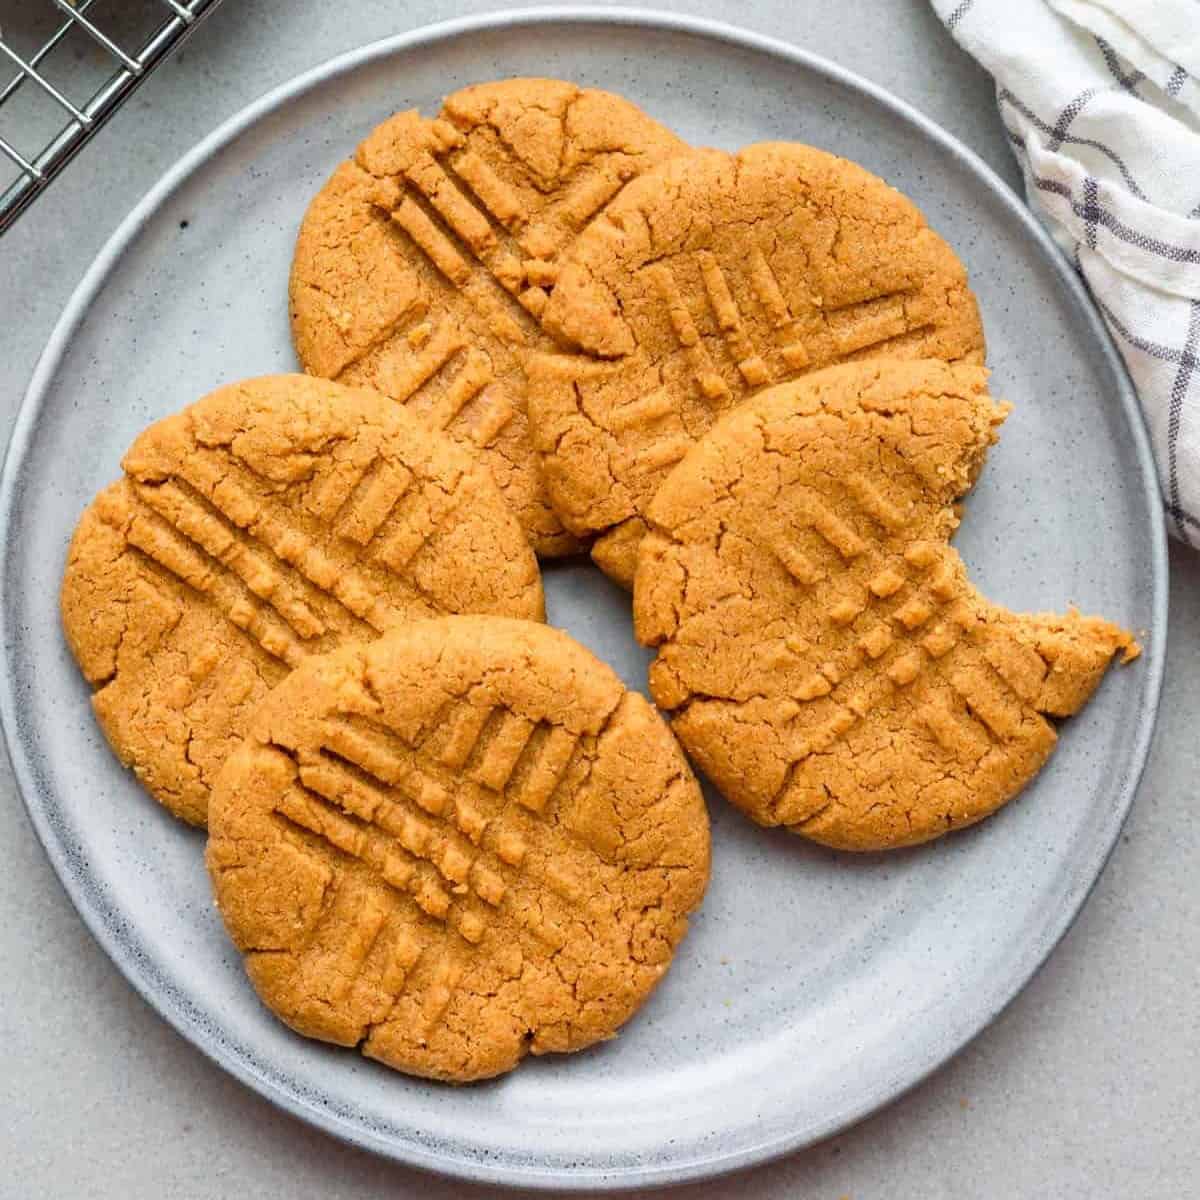 https://feelgoodfoodie.net/wp-content/uploads/2023/04/3-Ingredient-Peanut-Butter-Cookies-TIMG.jpg